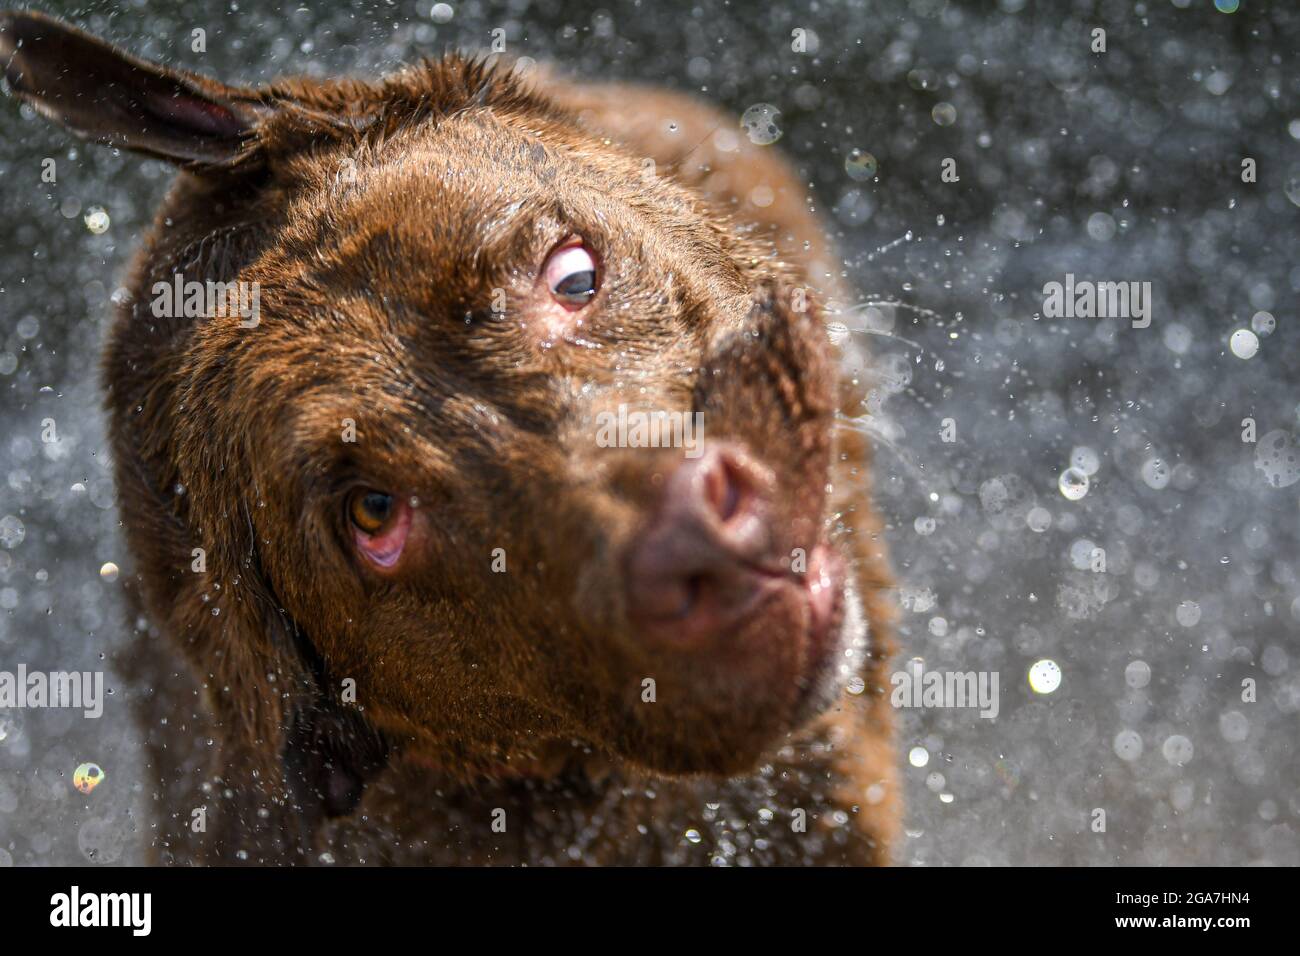 Crazy dog / silly dog shaking off water - silly face with wild eyes and strange expression Stock Photo